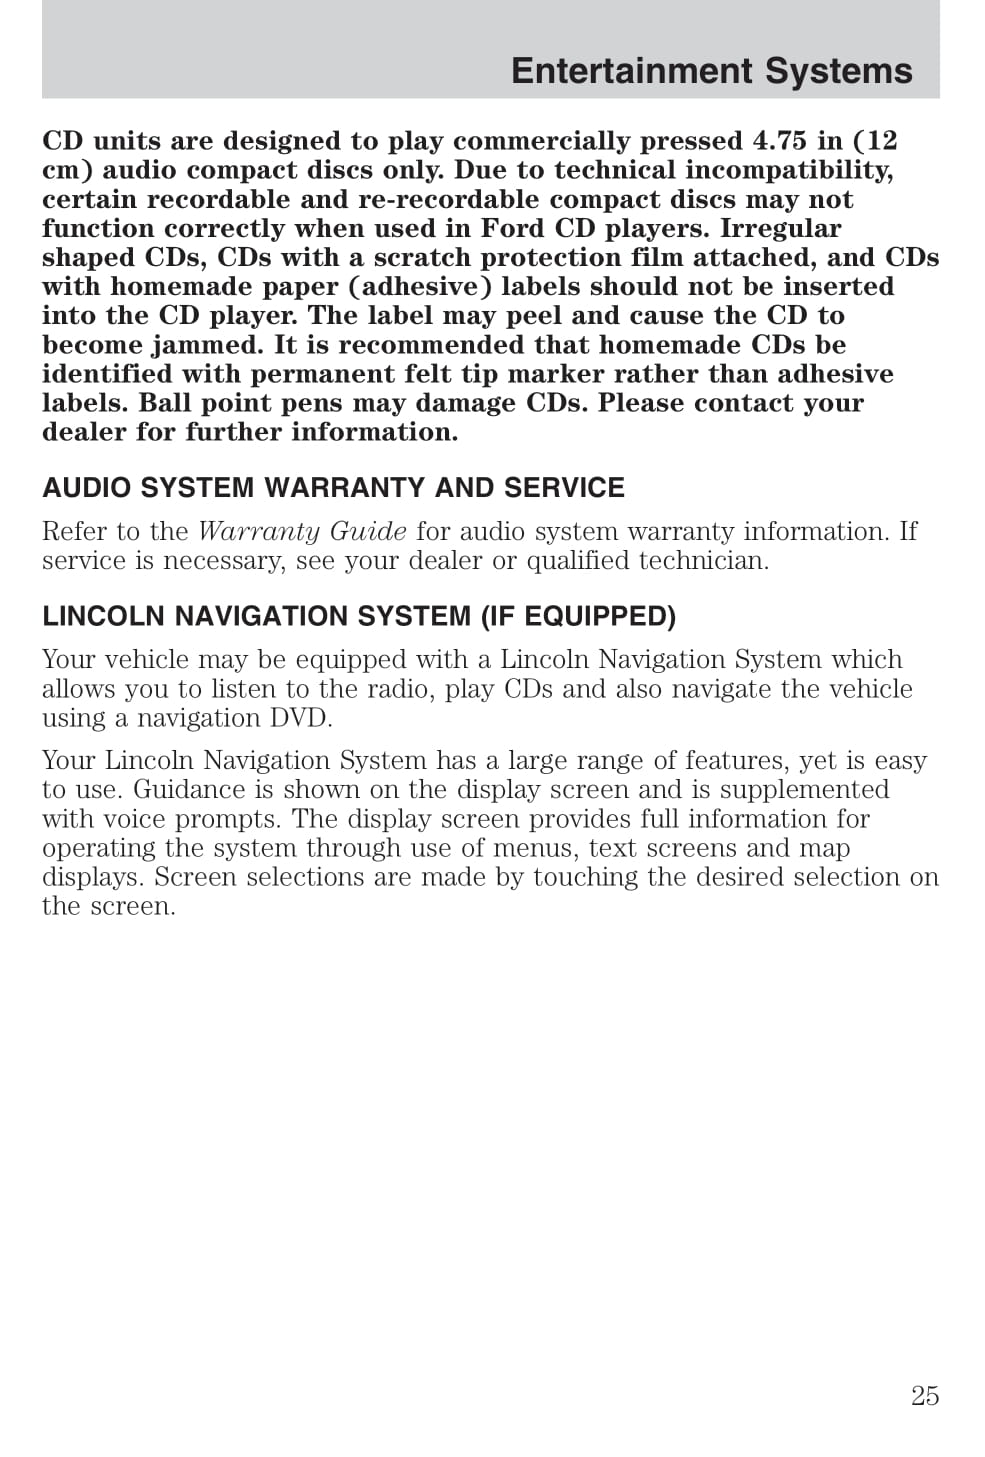 2004 Lincoln Town Car Owner's Manual | English